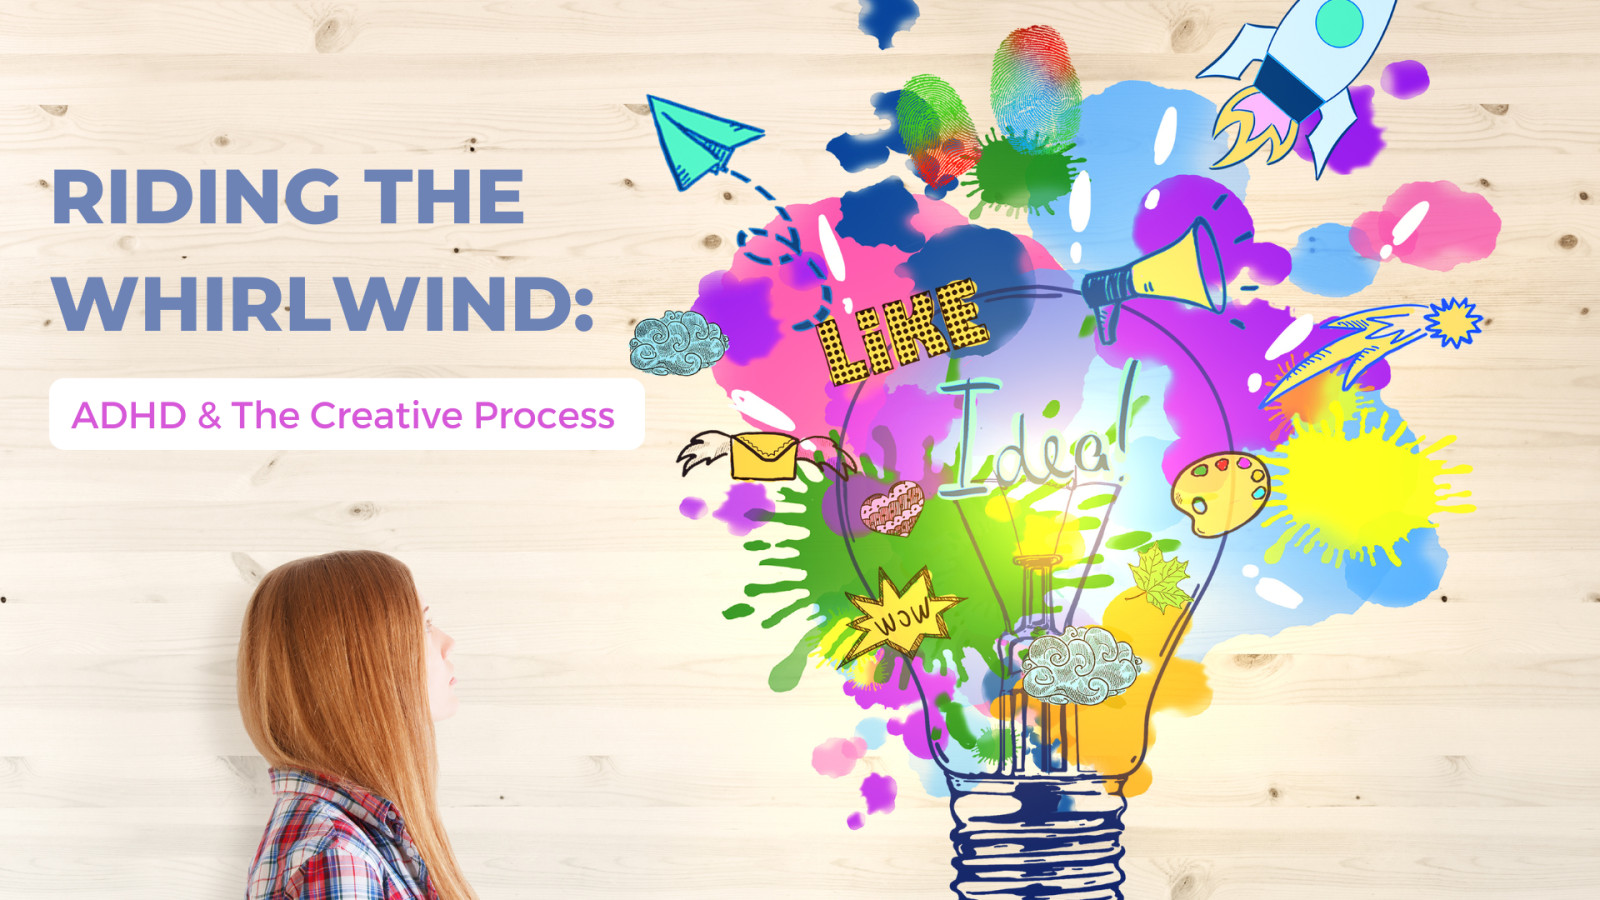 Riding the Whirlwind: ADHD & The Creative Process